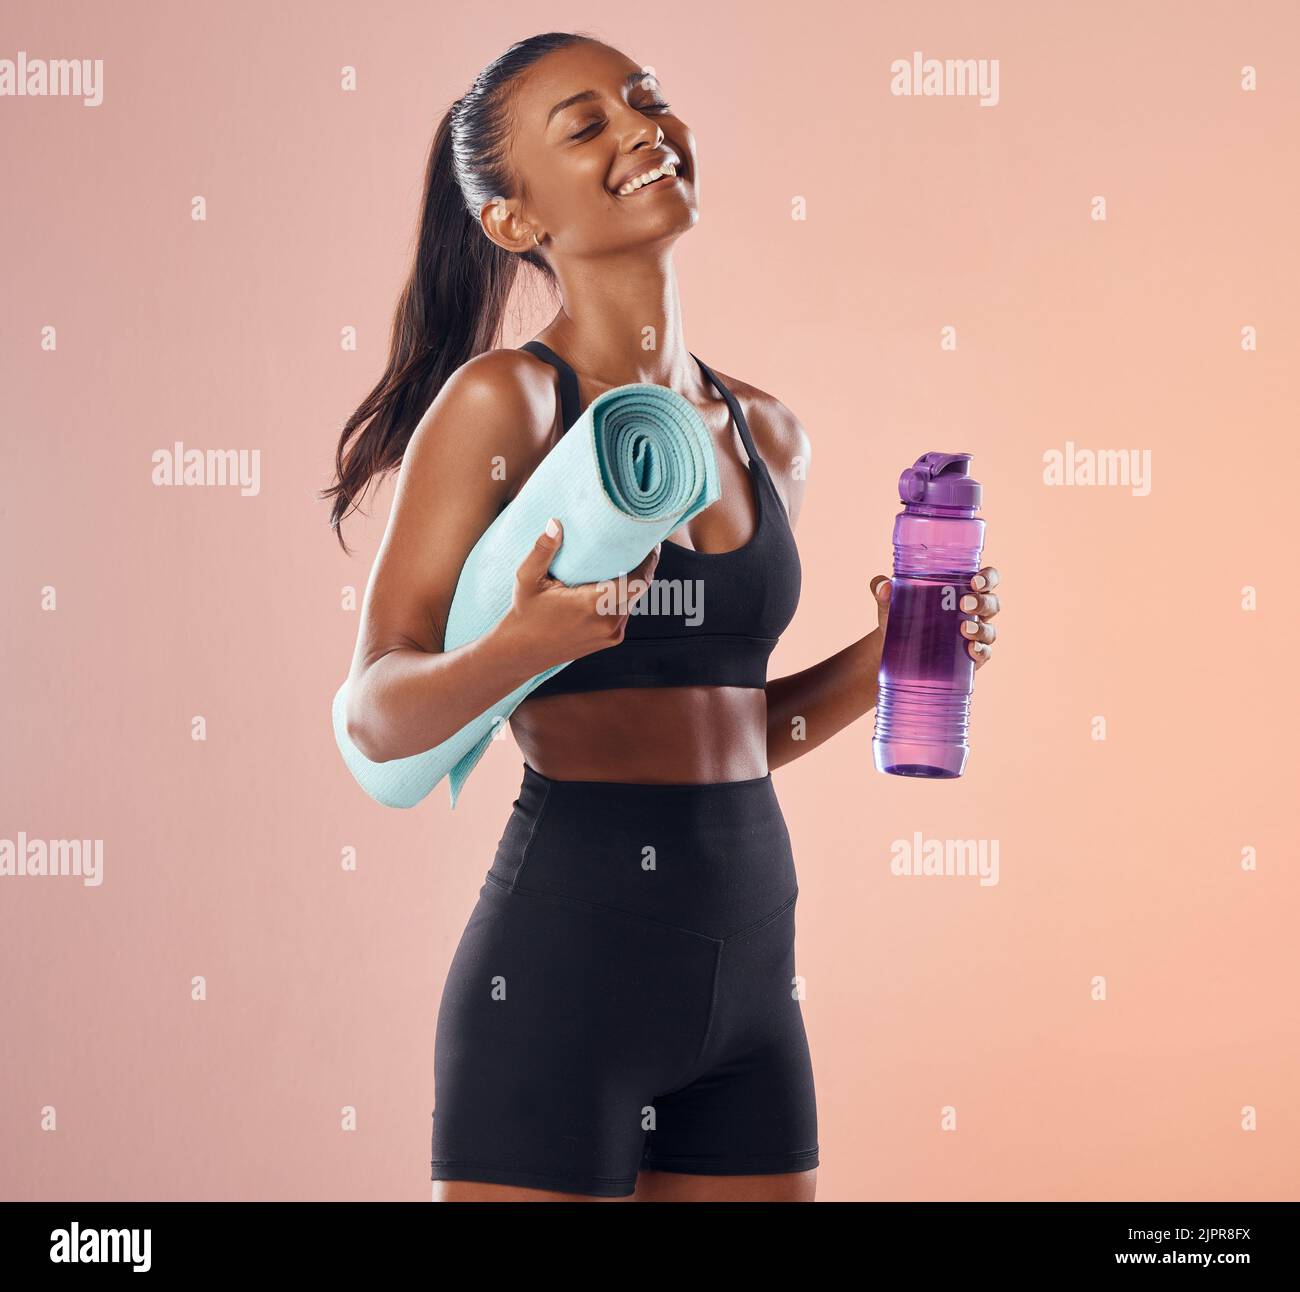 Happy, fitness and healthy while holding exercise mat and water bottle against peach studio background. Fit woman with slim body after exercise Stock Photo